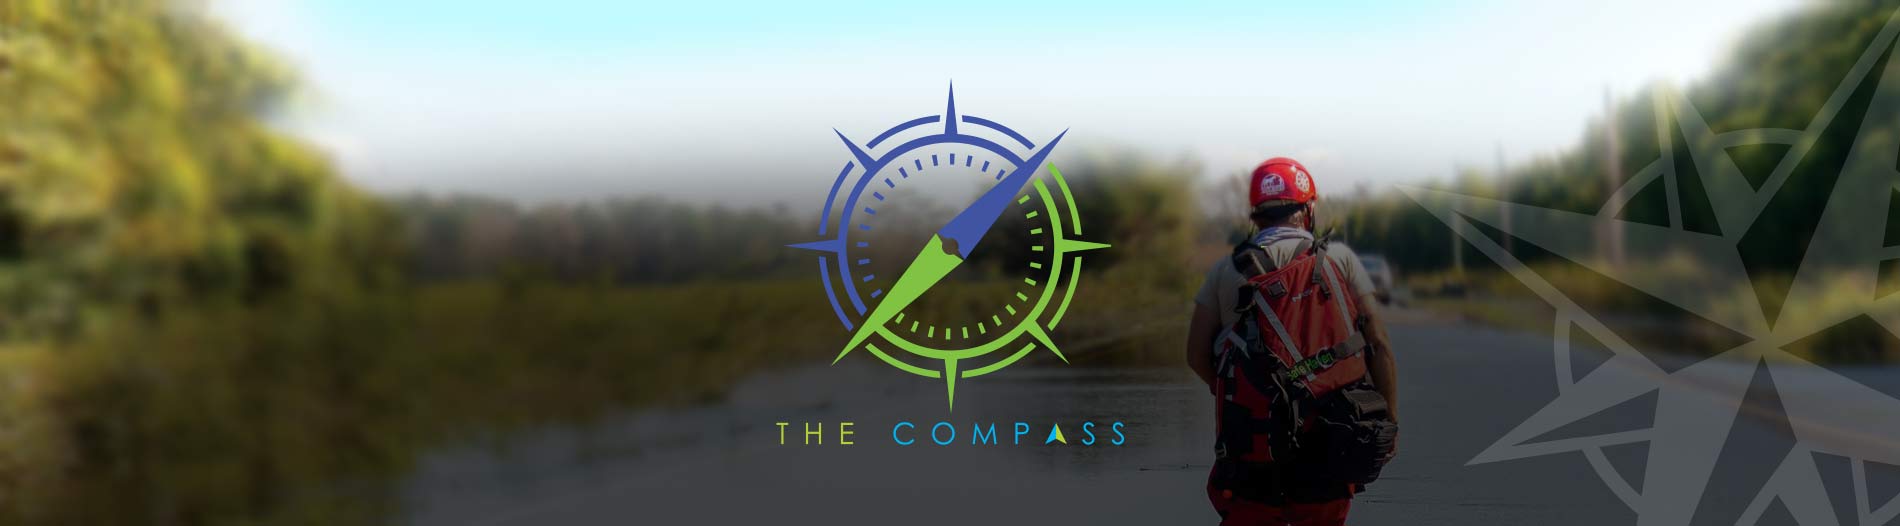 Compass graphic over man rescuing animals